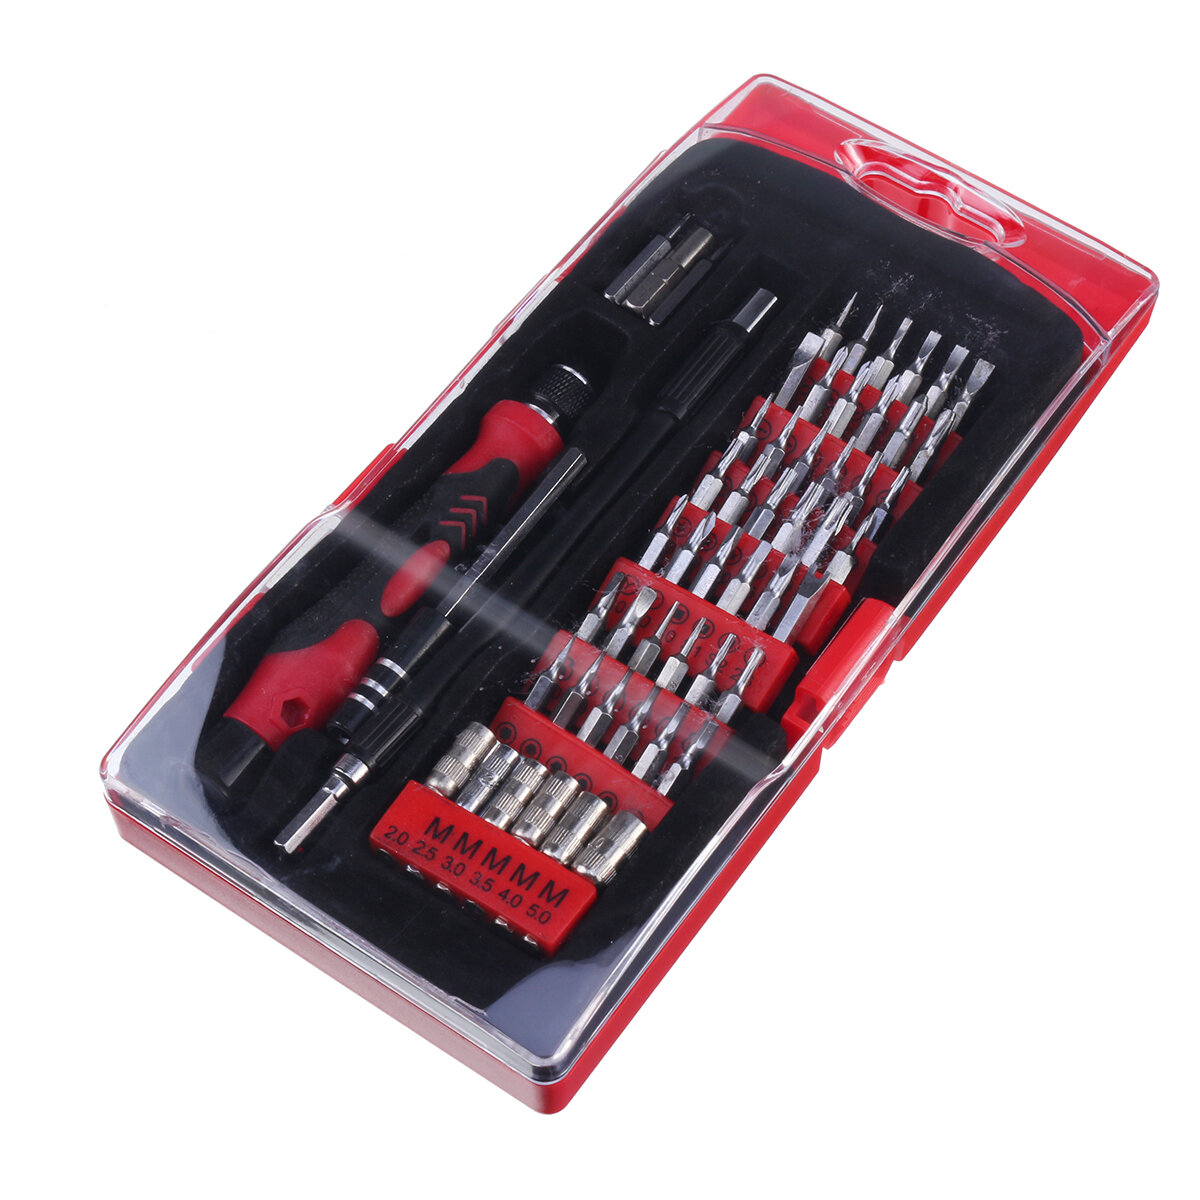 59 in 1 Mini DC 3.6V Electric Power Screwdriver Set Cordless Screwdriver Household Home Tool